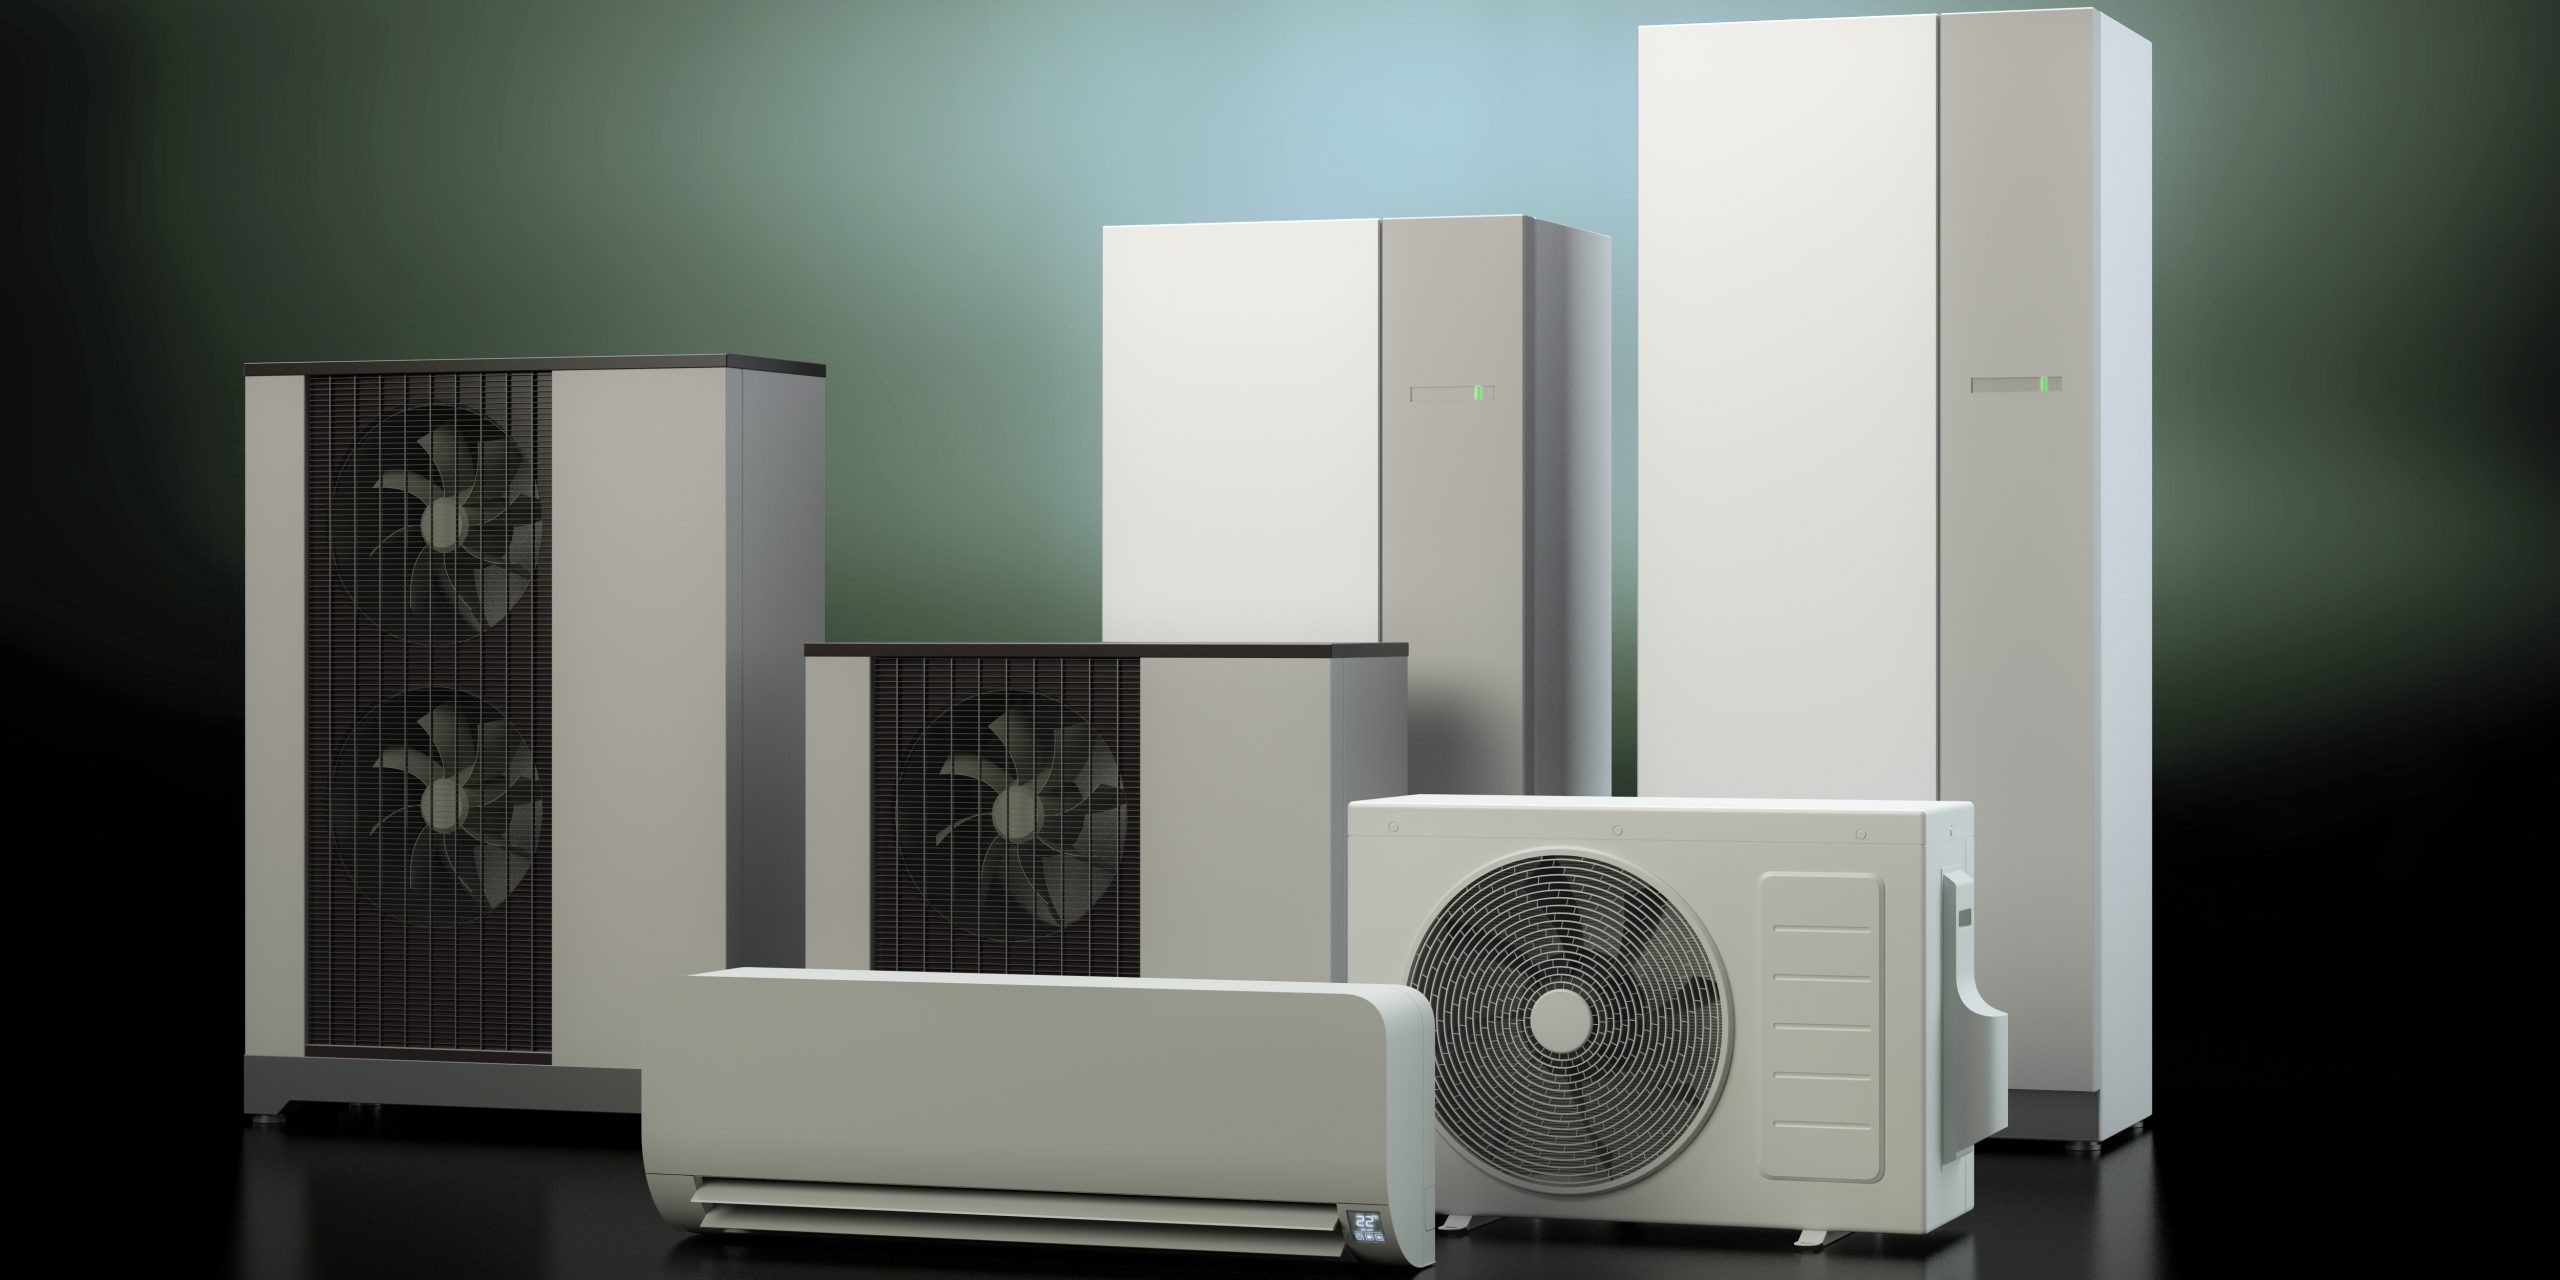 Heat Pumps vs Air Conditioners: Which is Best? post thumbnail image